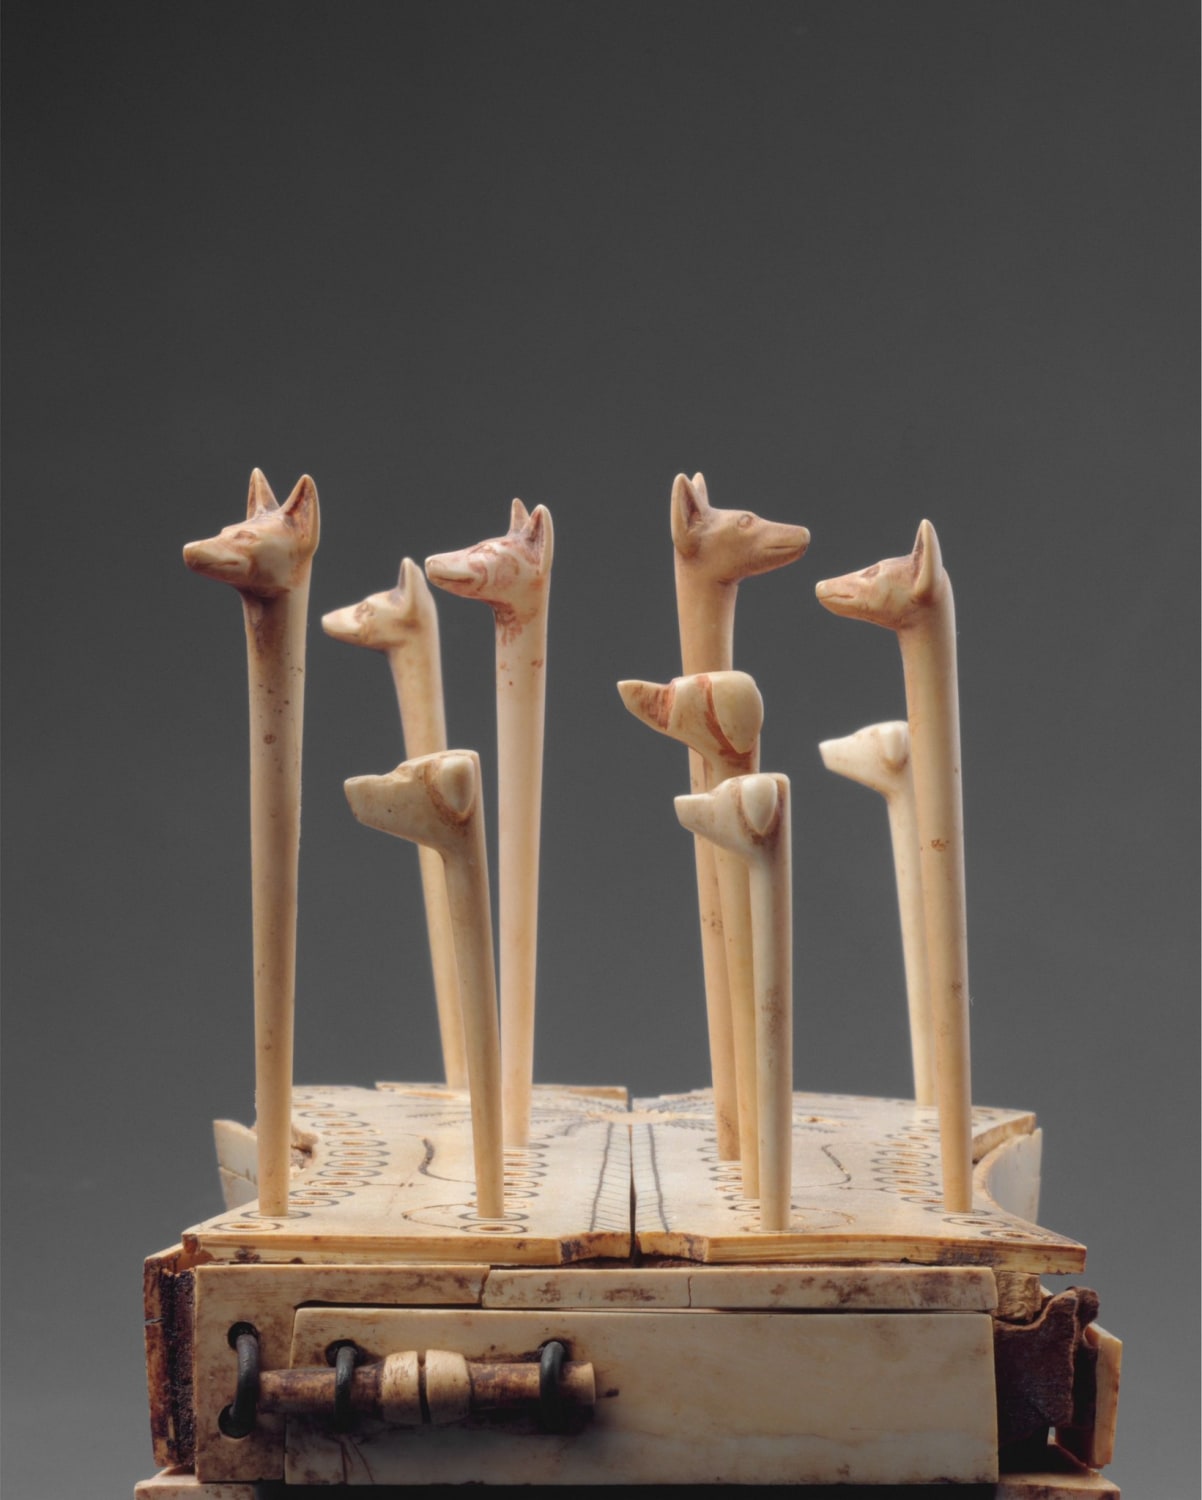 Up for a game of Hounds and Jackals? 🎲 Ancient Egyptians likened the intricate voyage through the underworld to a game. This made gaming boards and gaming pieces (like this one) appropriate objects to place in tombs. Learn more on the